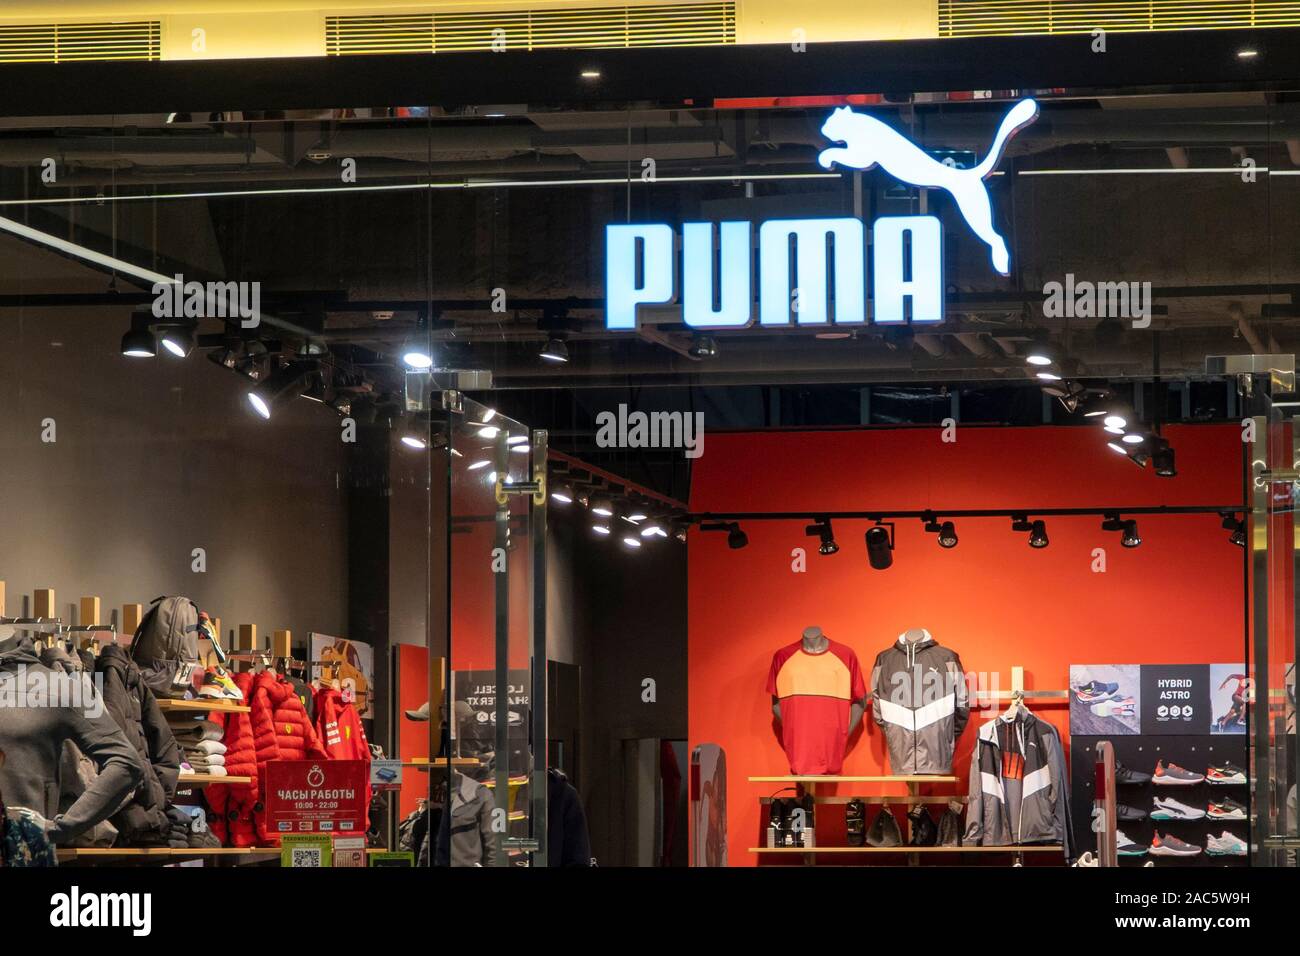 Puma Store High Resolution Stock Photography and Images - Alamy